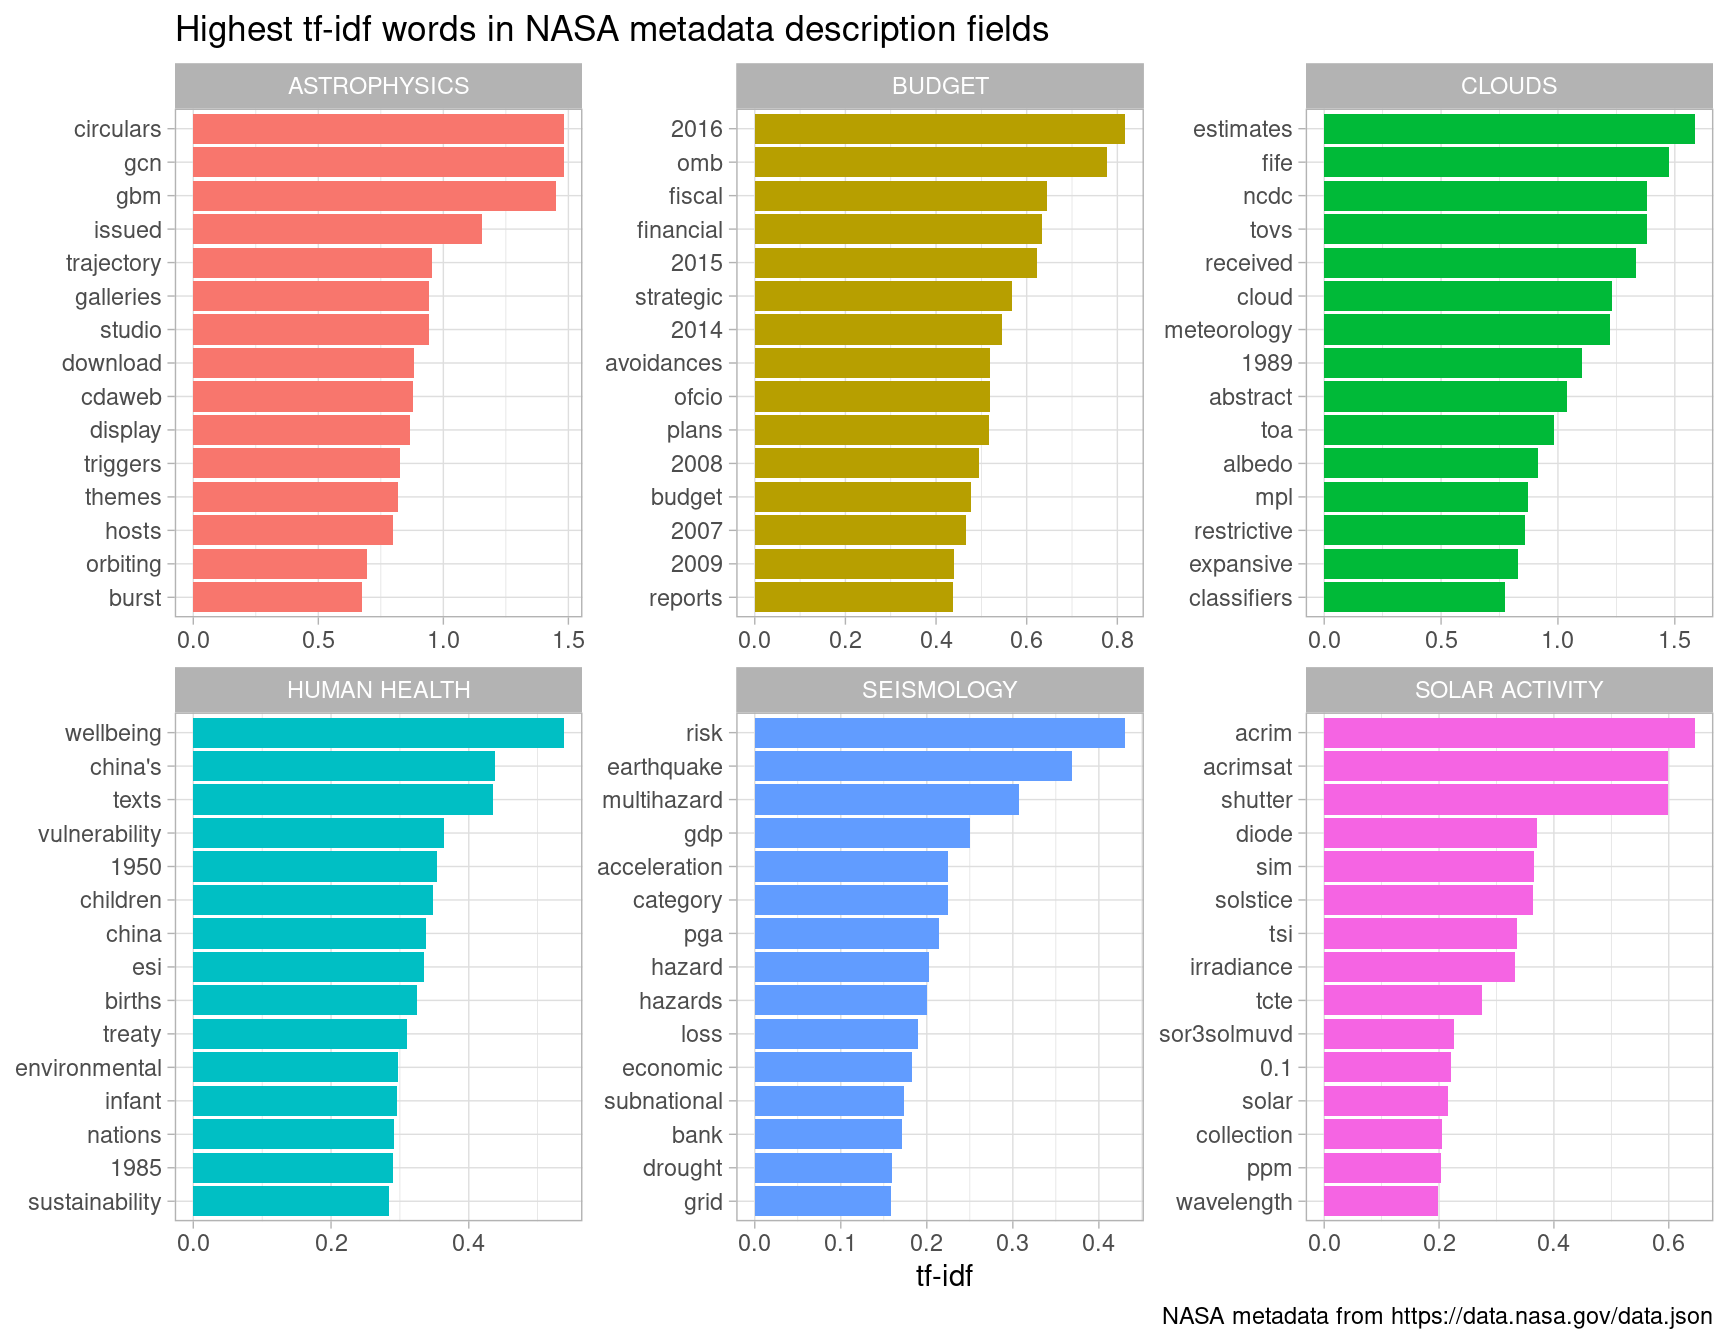 Distribution of tf-idf for words from datasets labeled with selected keywords